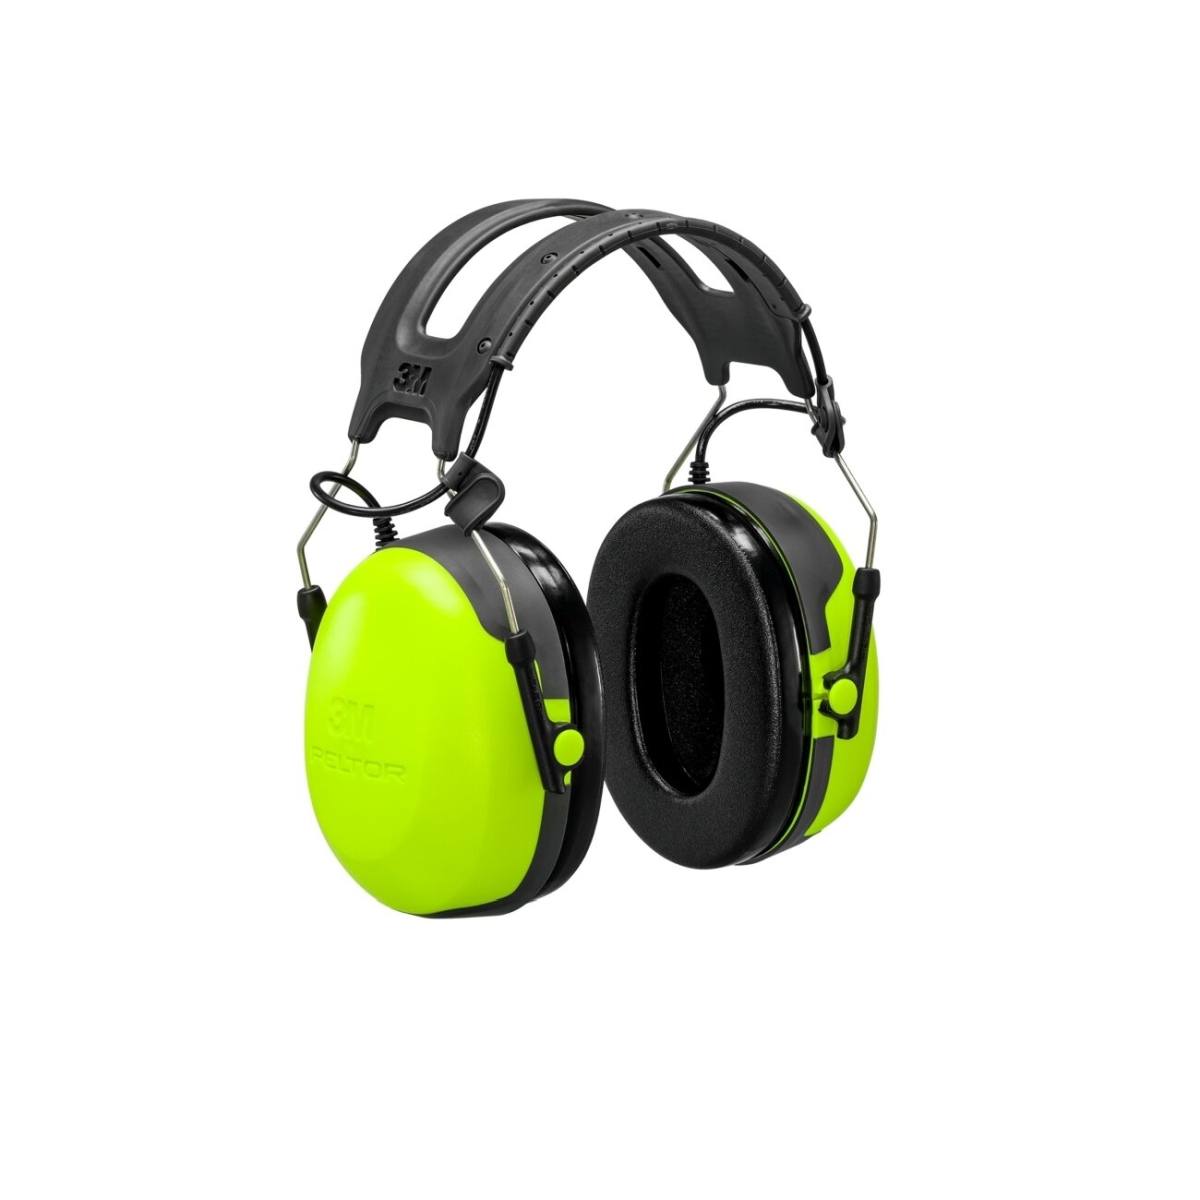 3M PELTOR CH-3 Hearing protection, Listen-Only, headband, yellow, HT52A-112